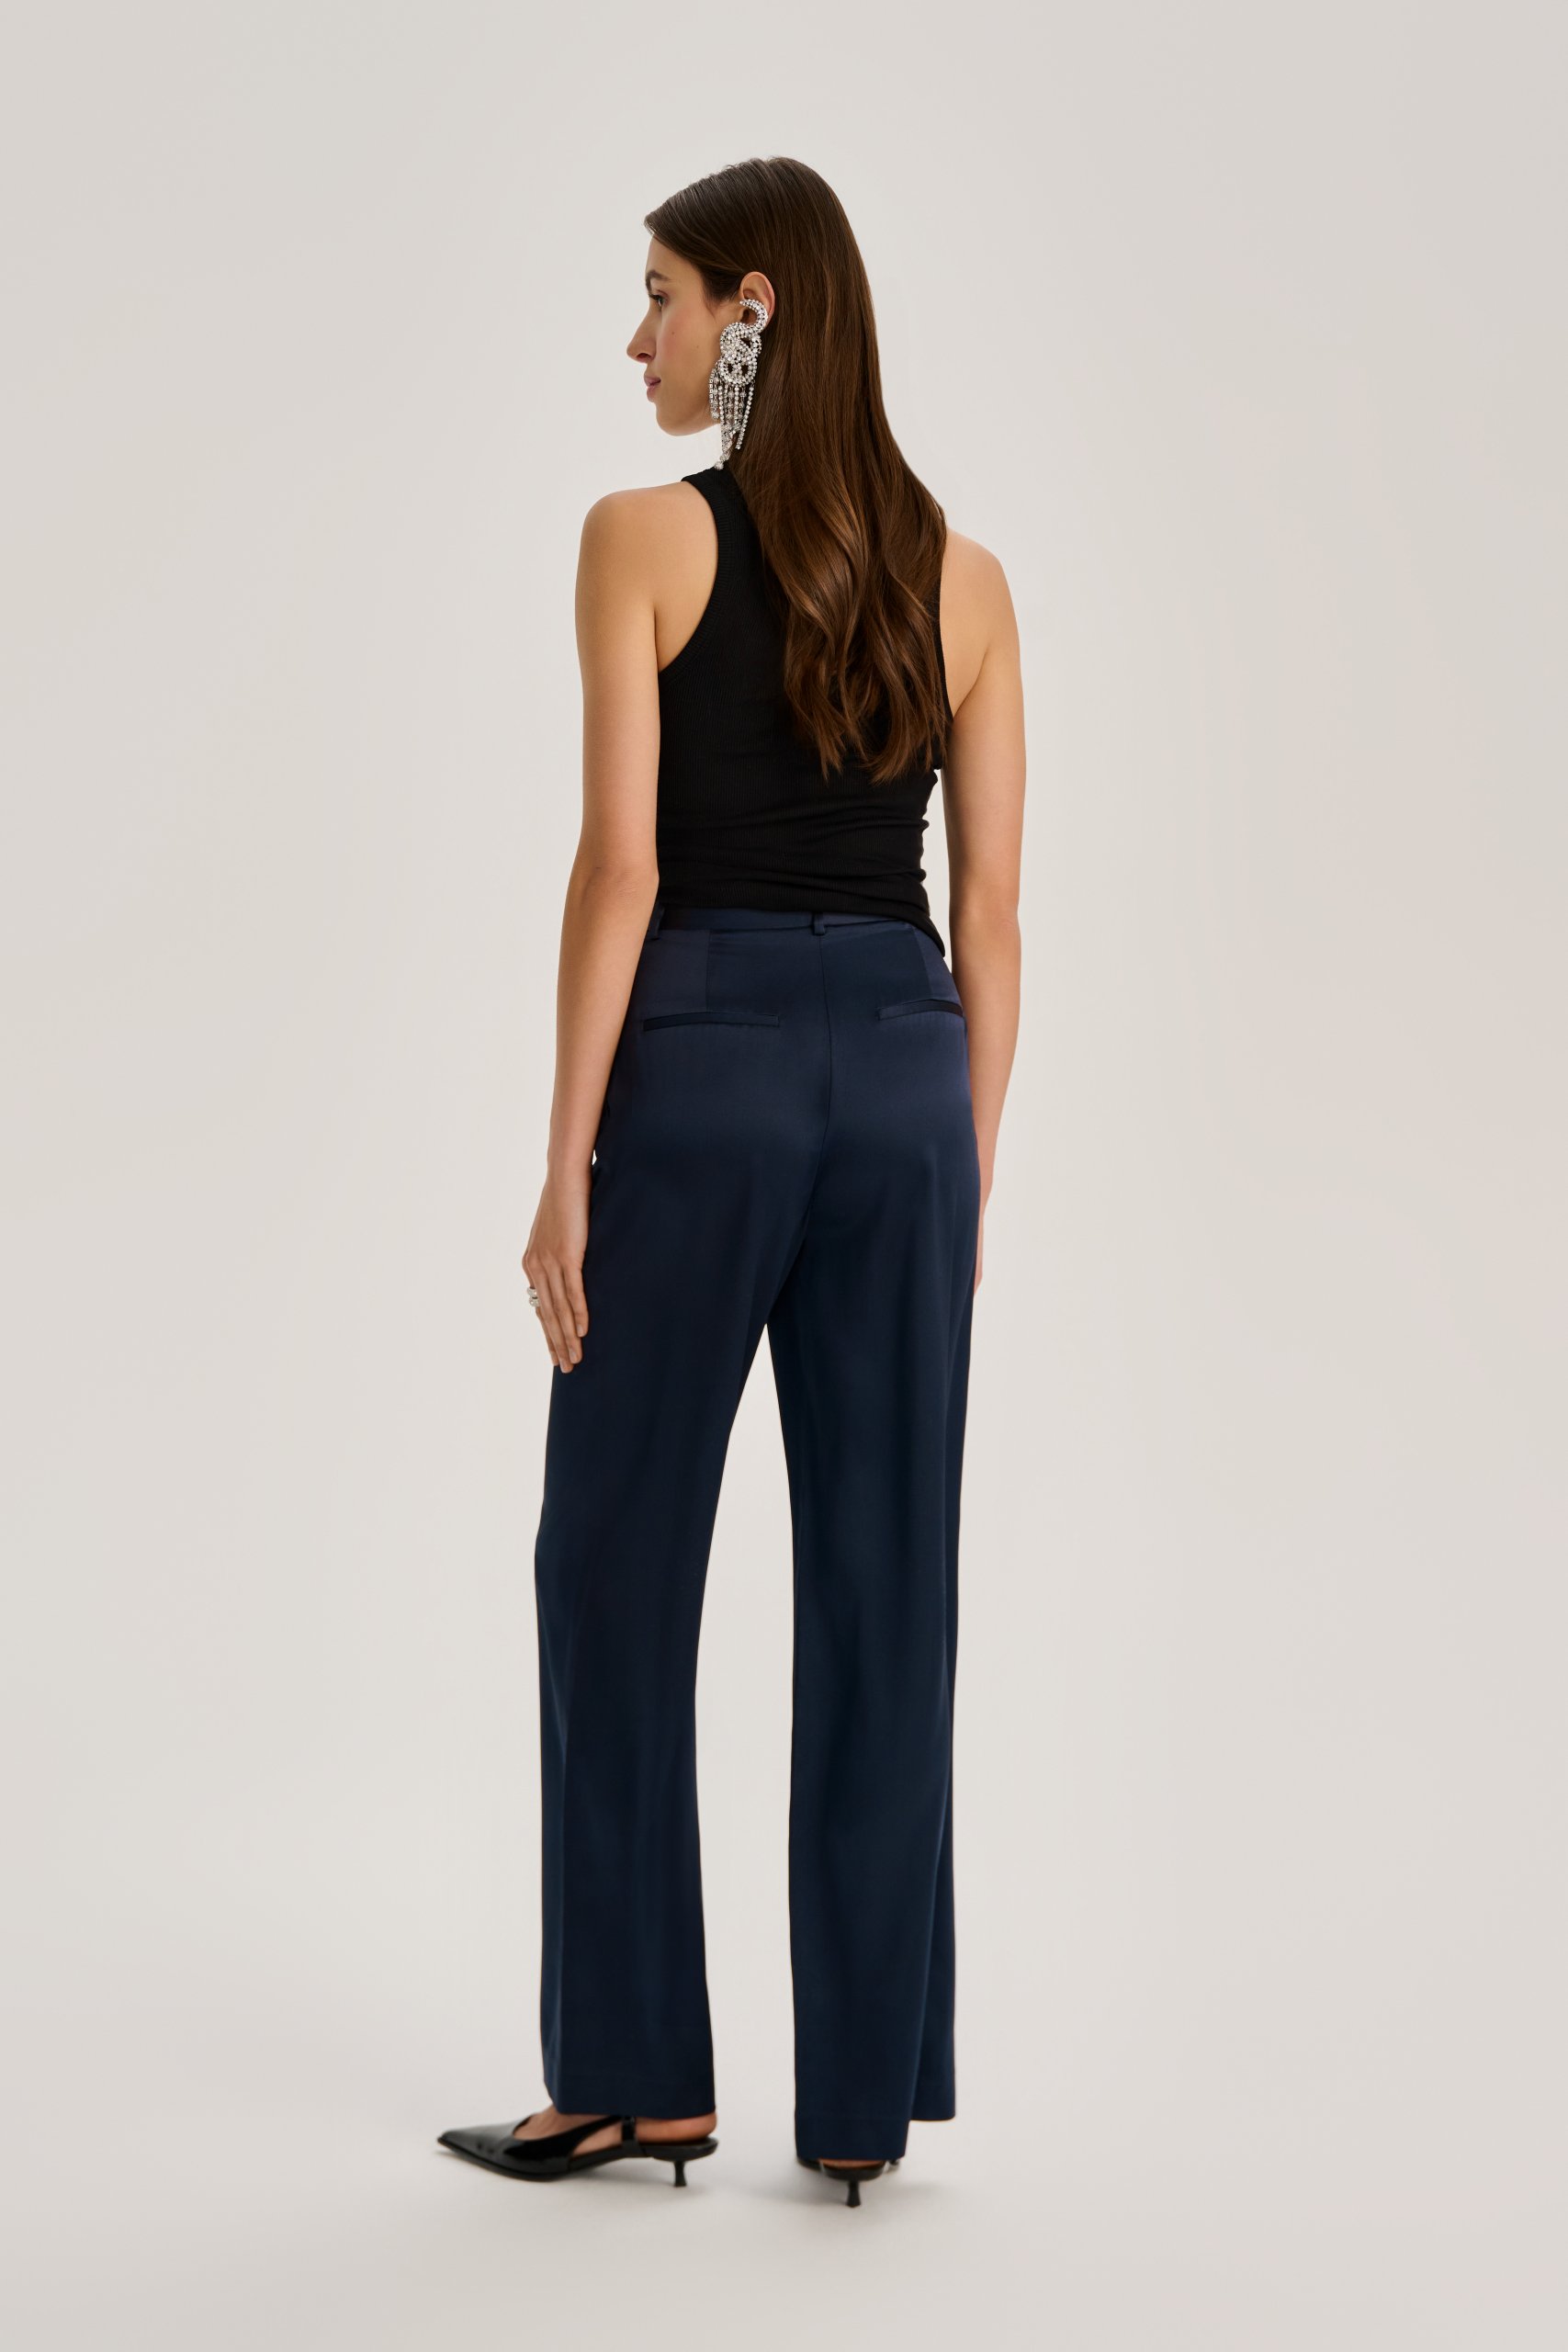 SILK SUIT TROUSERS FROM THE MOON COLLECTION